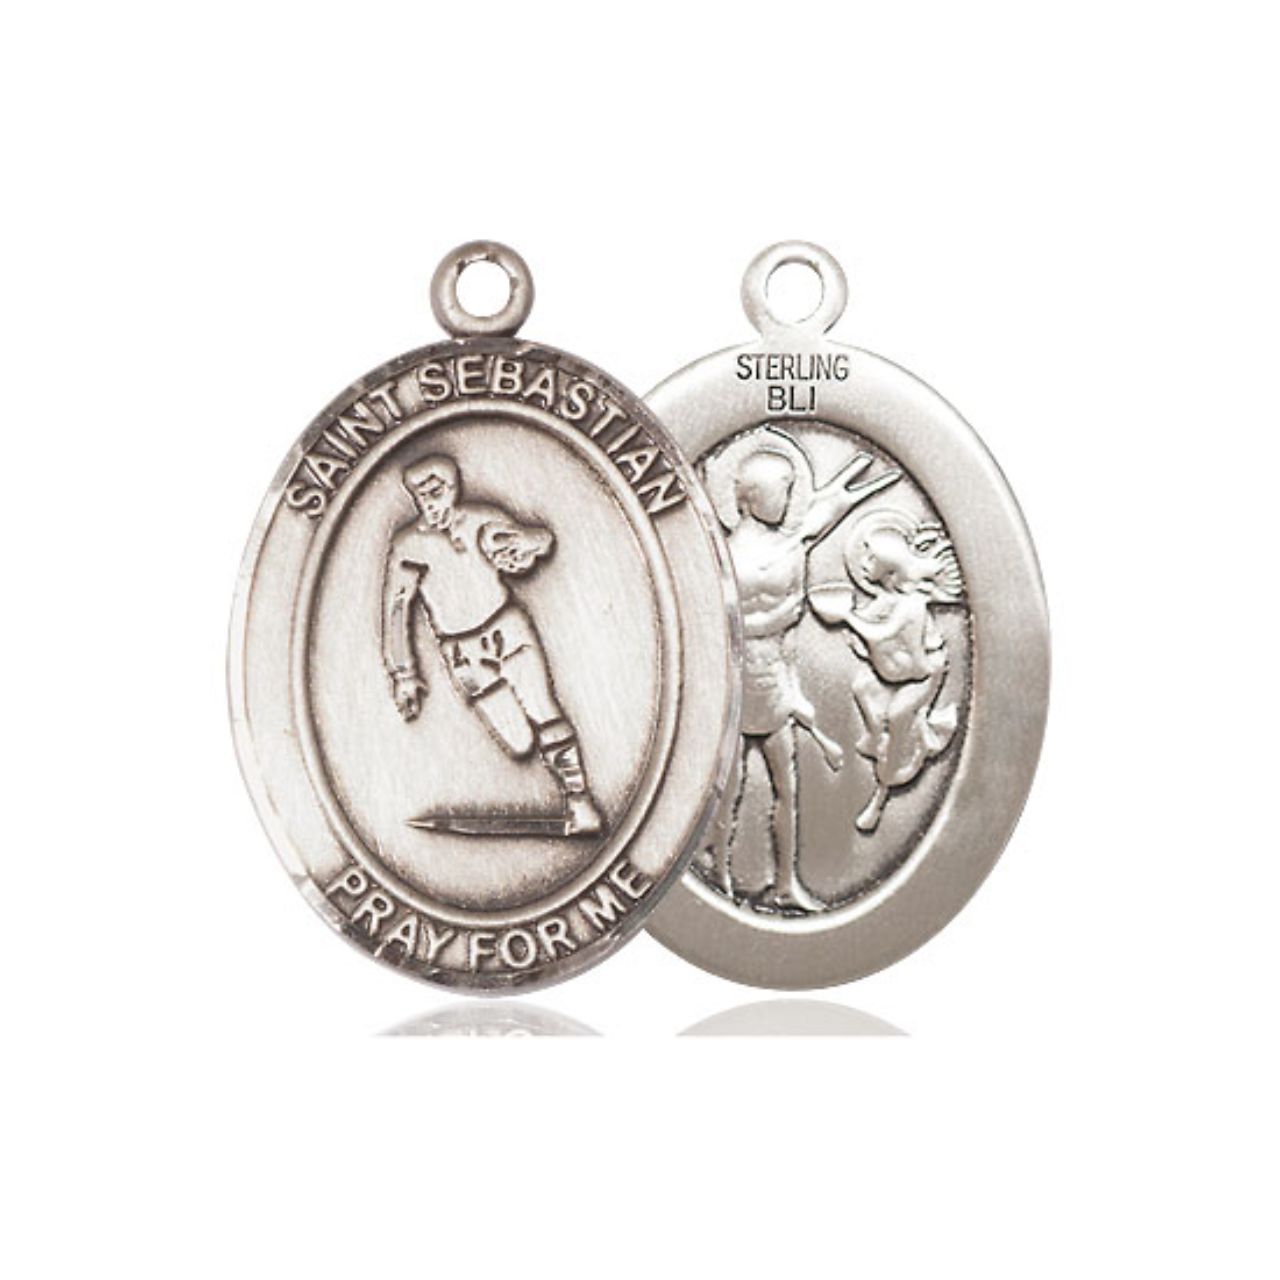 St. Sebastian Rugby Medal - Sterling Silver Oval Pendant (3 Sizes)